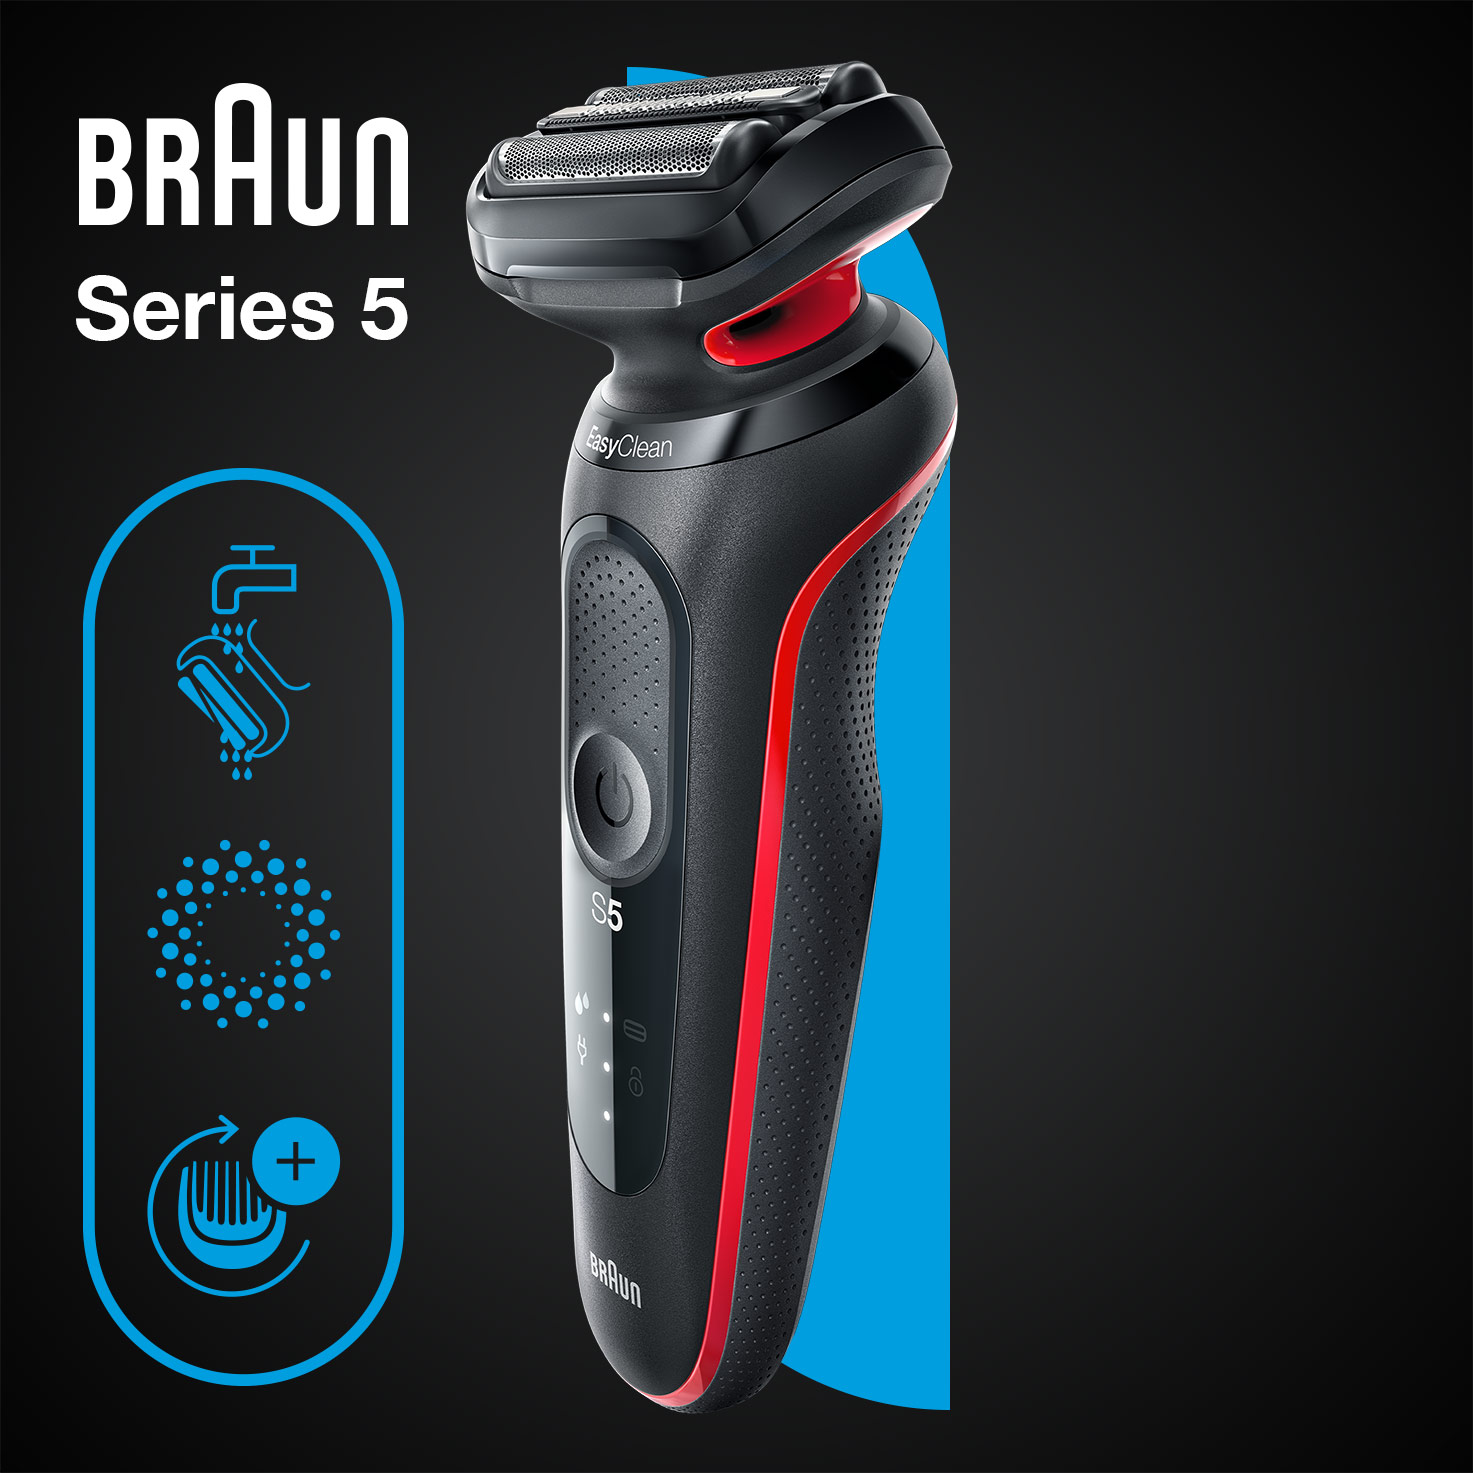 Series 5 shaver, Dry 51-R1000s Wet 